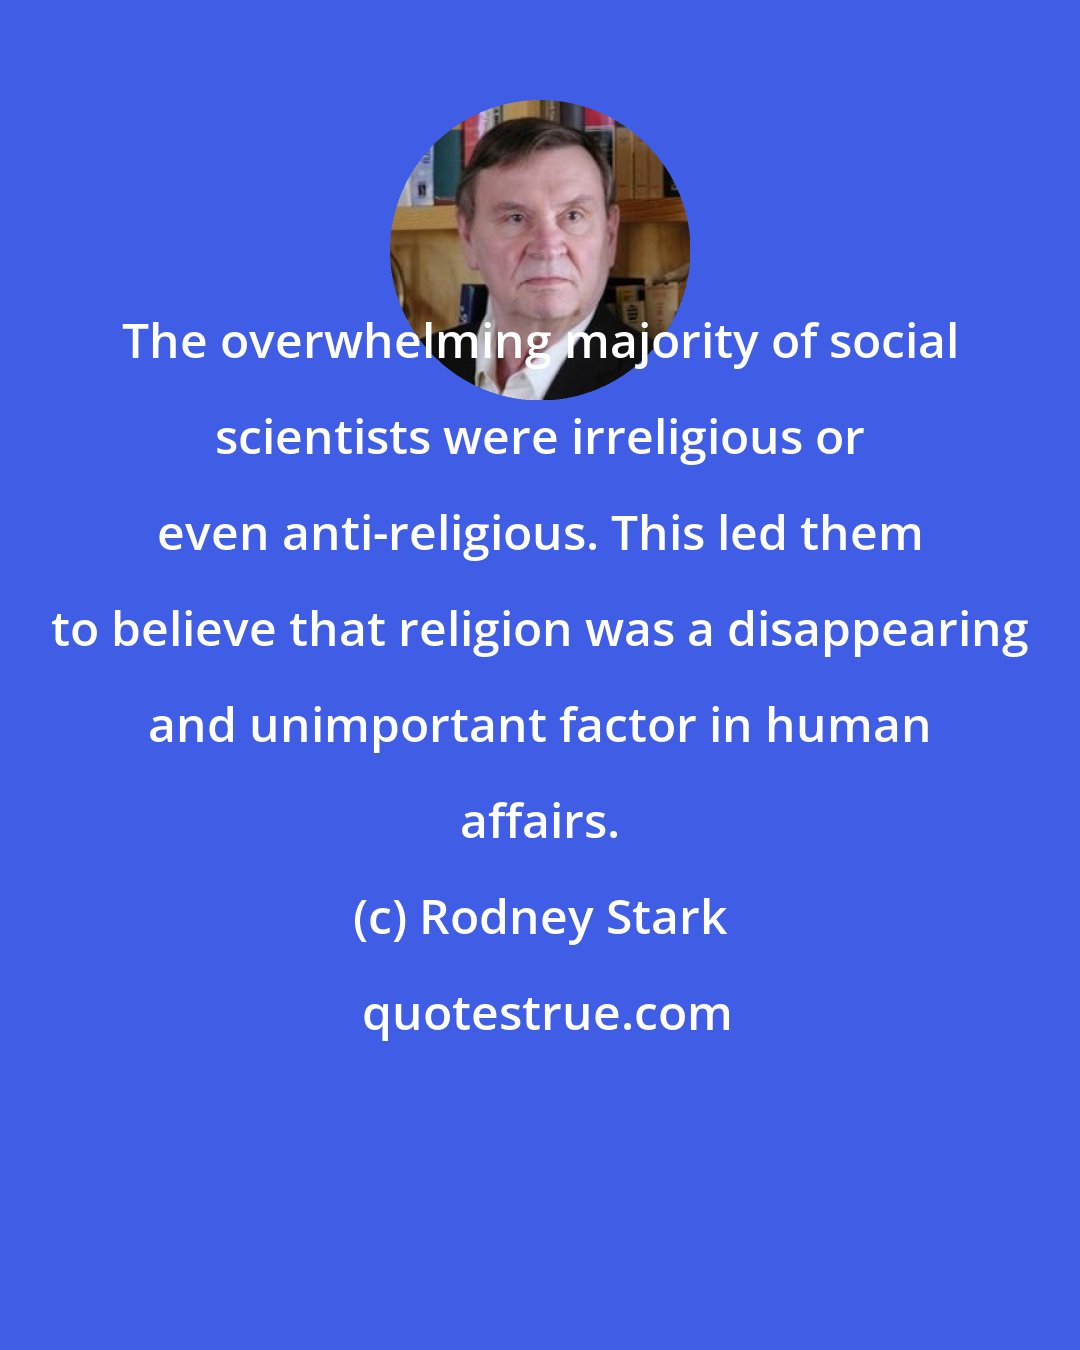 Rodney Stark: The overwhelming majority of social scientists were irreligious or even anti-religious. This led them to believe that religion was a disappearing and unimportant factor in human affairs.